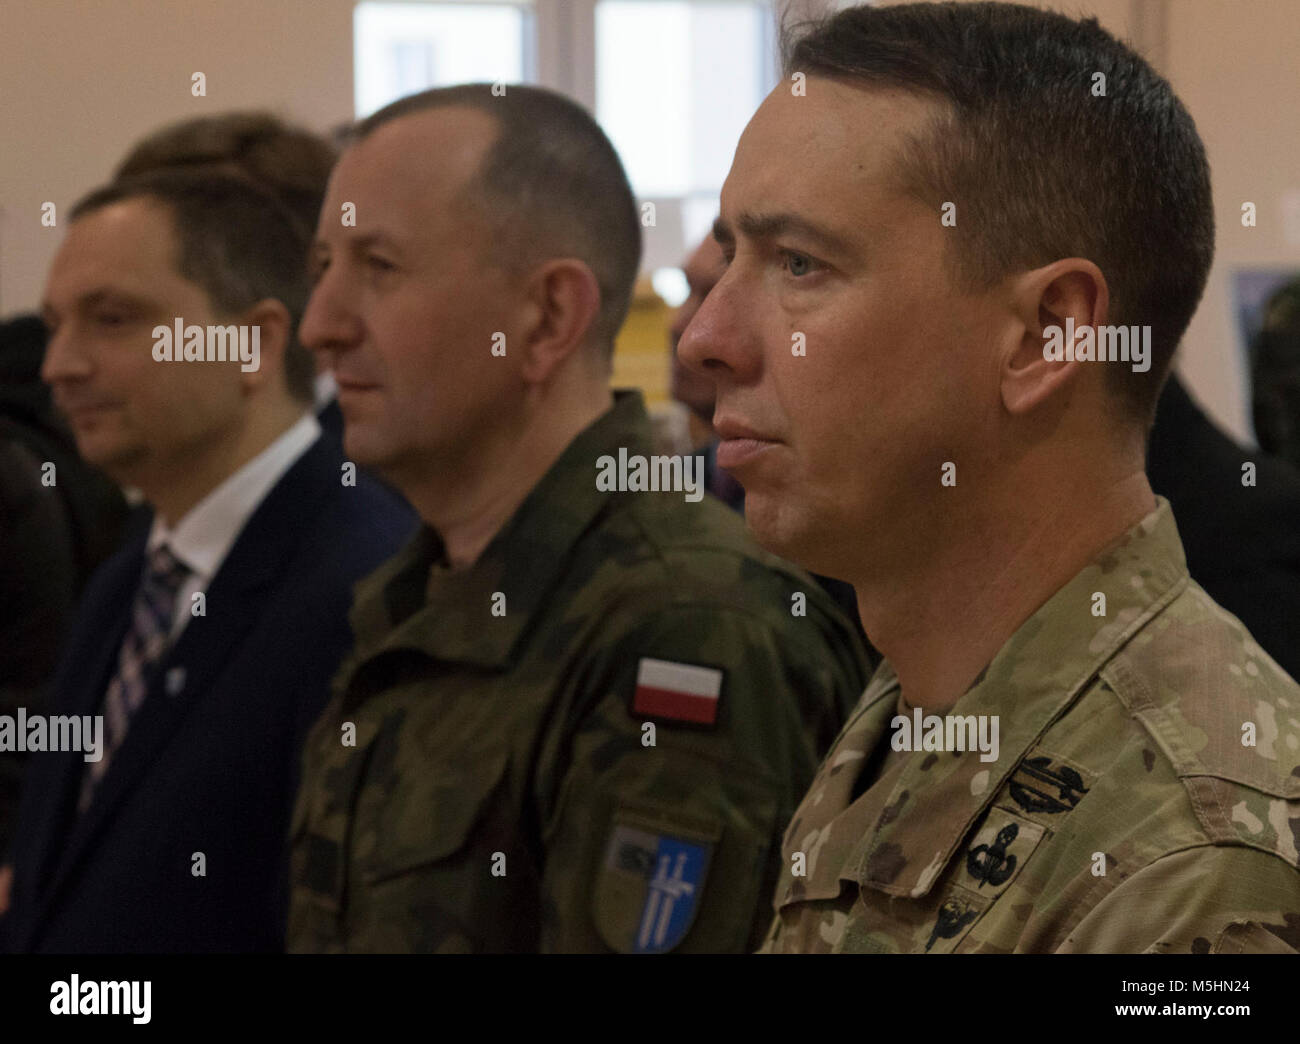 The leaders of Battle Group Poland and local community leaders listen to Andrea Bekić, the Croatian Ambassador to Poland, speak as she expresses gratitude to Polish leaders and shares Croatian culture during a Croatian cultural celebration at the Polish 15th Mechanized Brigade headquarters, Poland, Feb. 12, 2018. The unique, multinational battle group is comprised of U.S., U.K., Croatian and Romanian soldiers serve with the Polish 15th Mechanized Brigade as a deterrence force in northeast Poland in support of NATO’s Enhanced Forward Presence. (U.S. Army Stock Photo